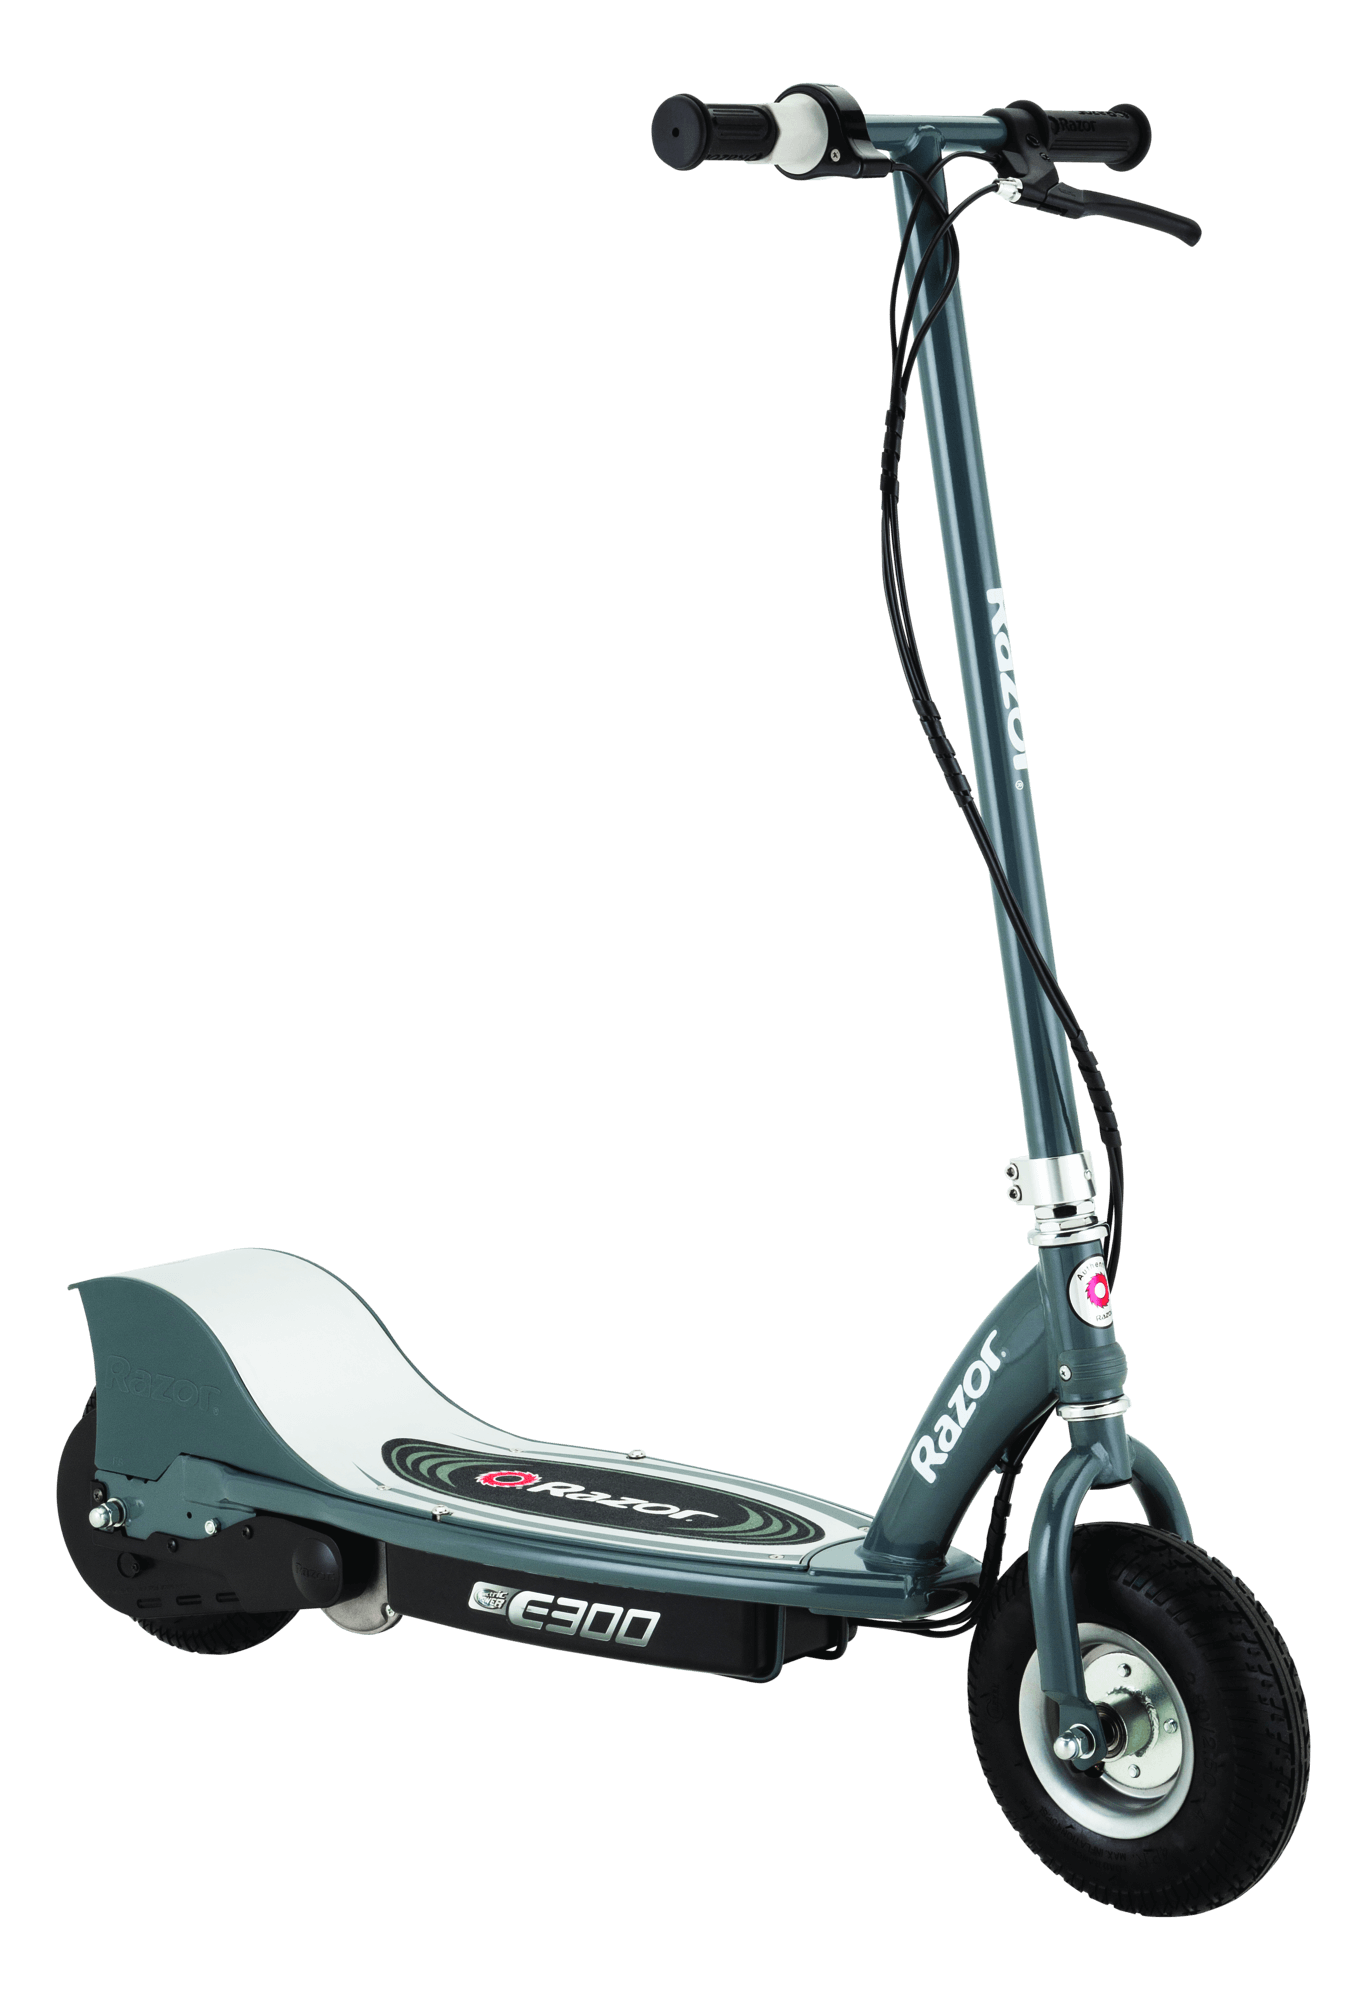 razor e300 electric 24 volt rechargeable motorized ride on kids scooter